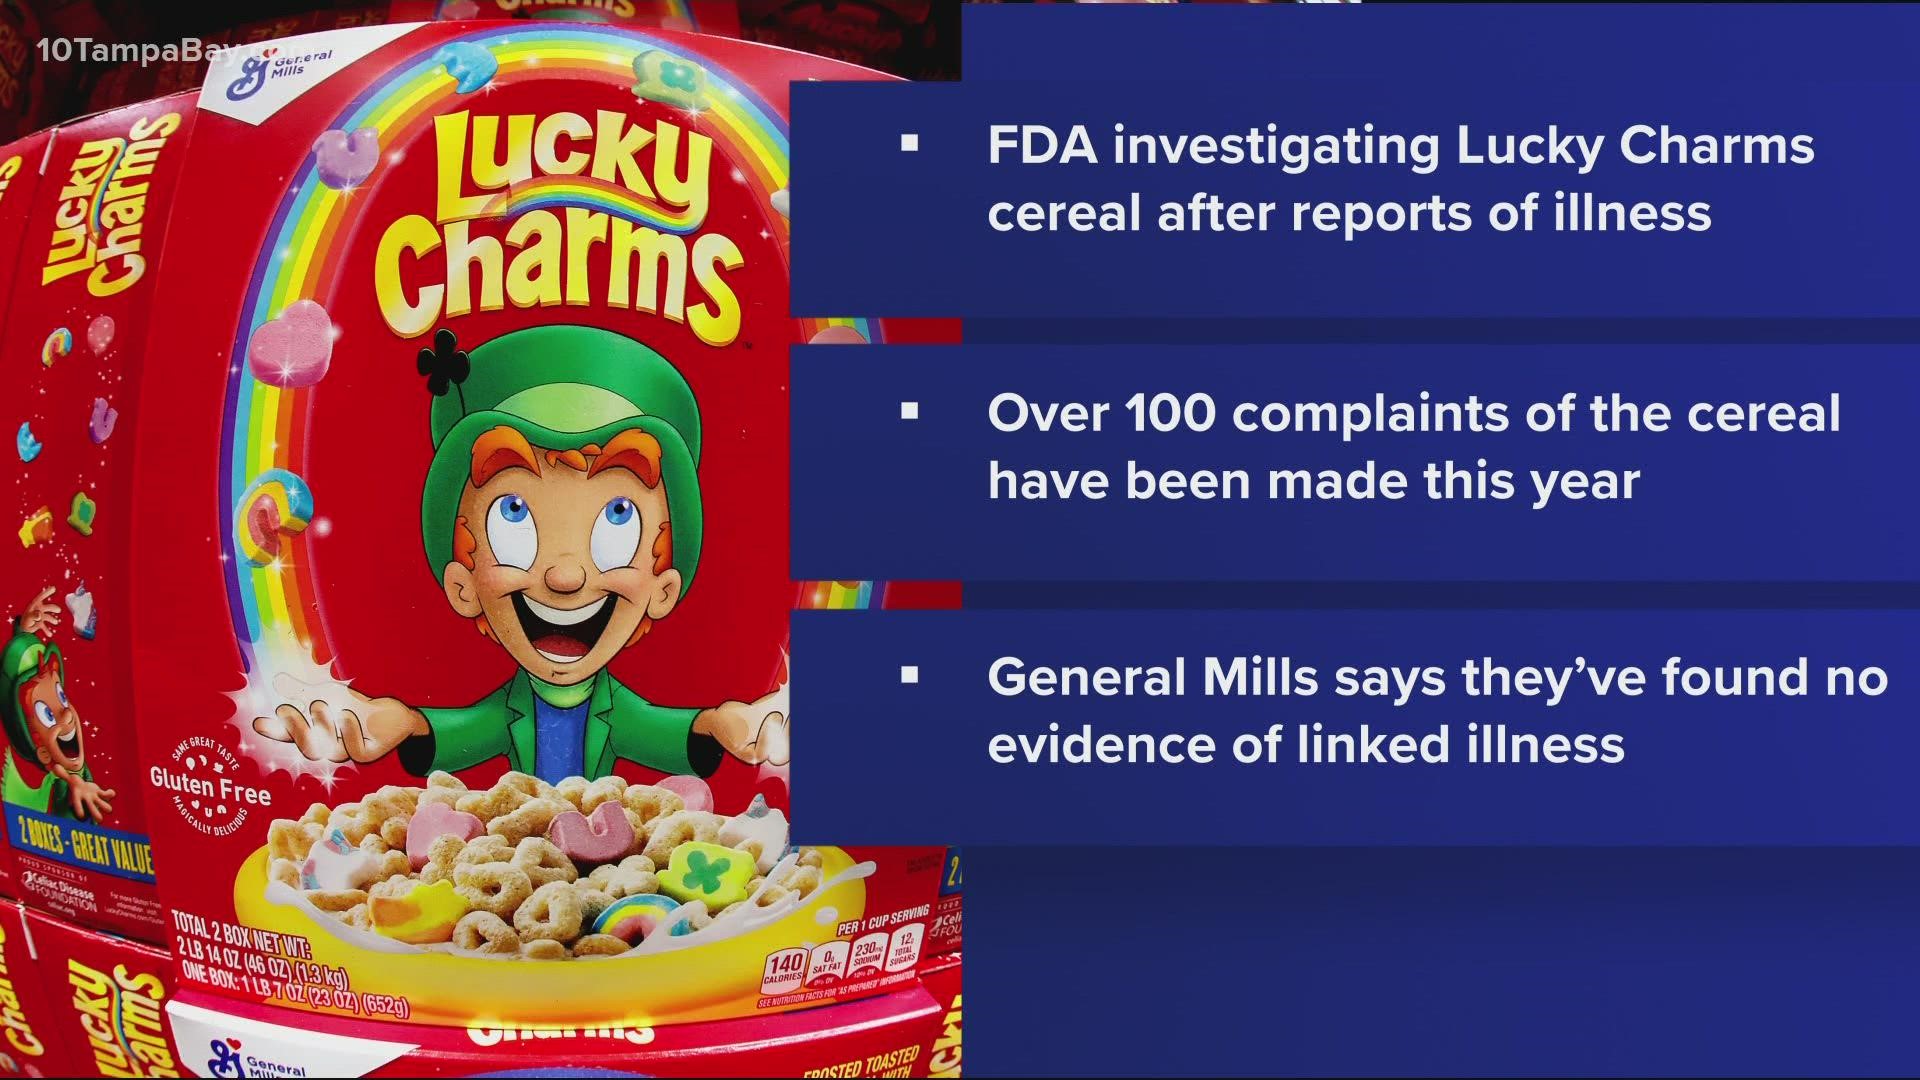 FDA investigating Lucky Charms cereal after reports of illness